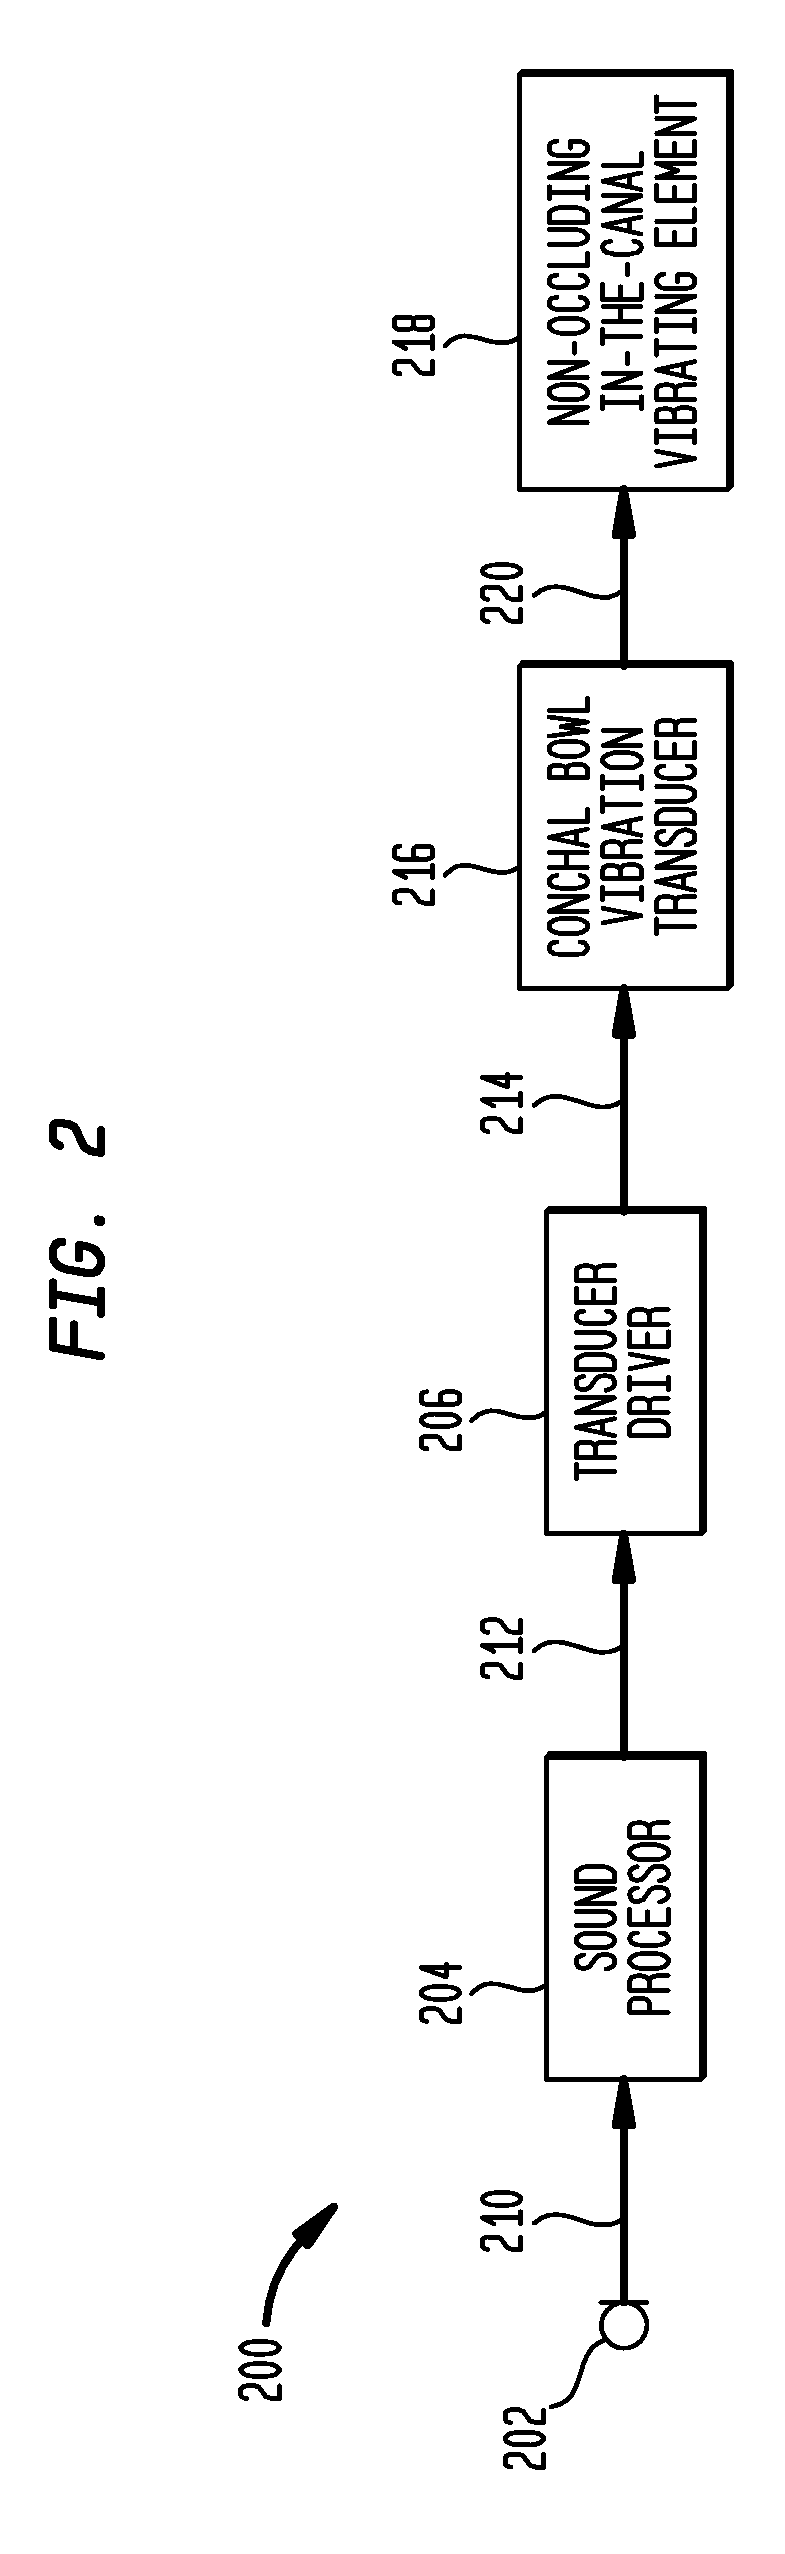 Hearing device having a non-occluding in the canal vibrating component